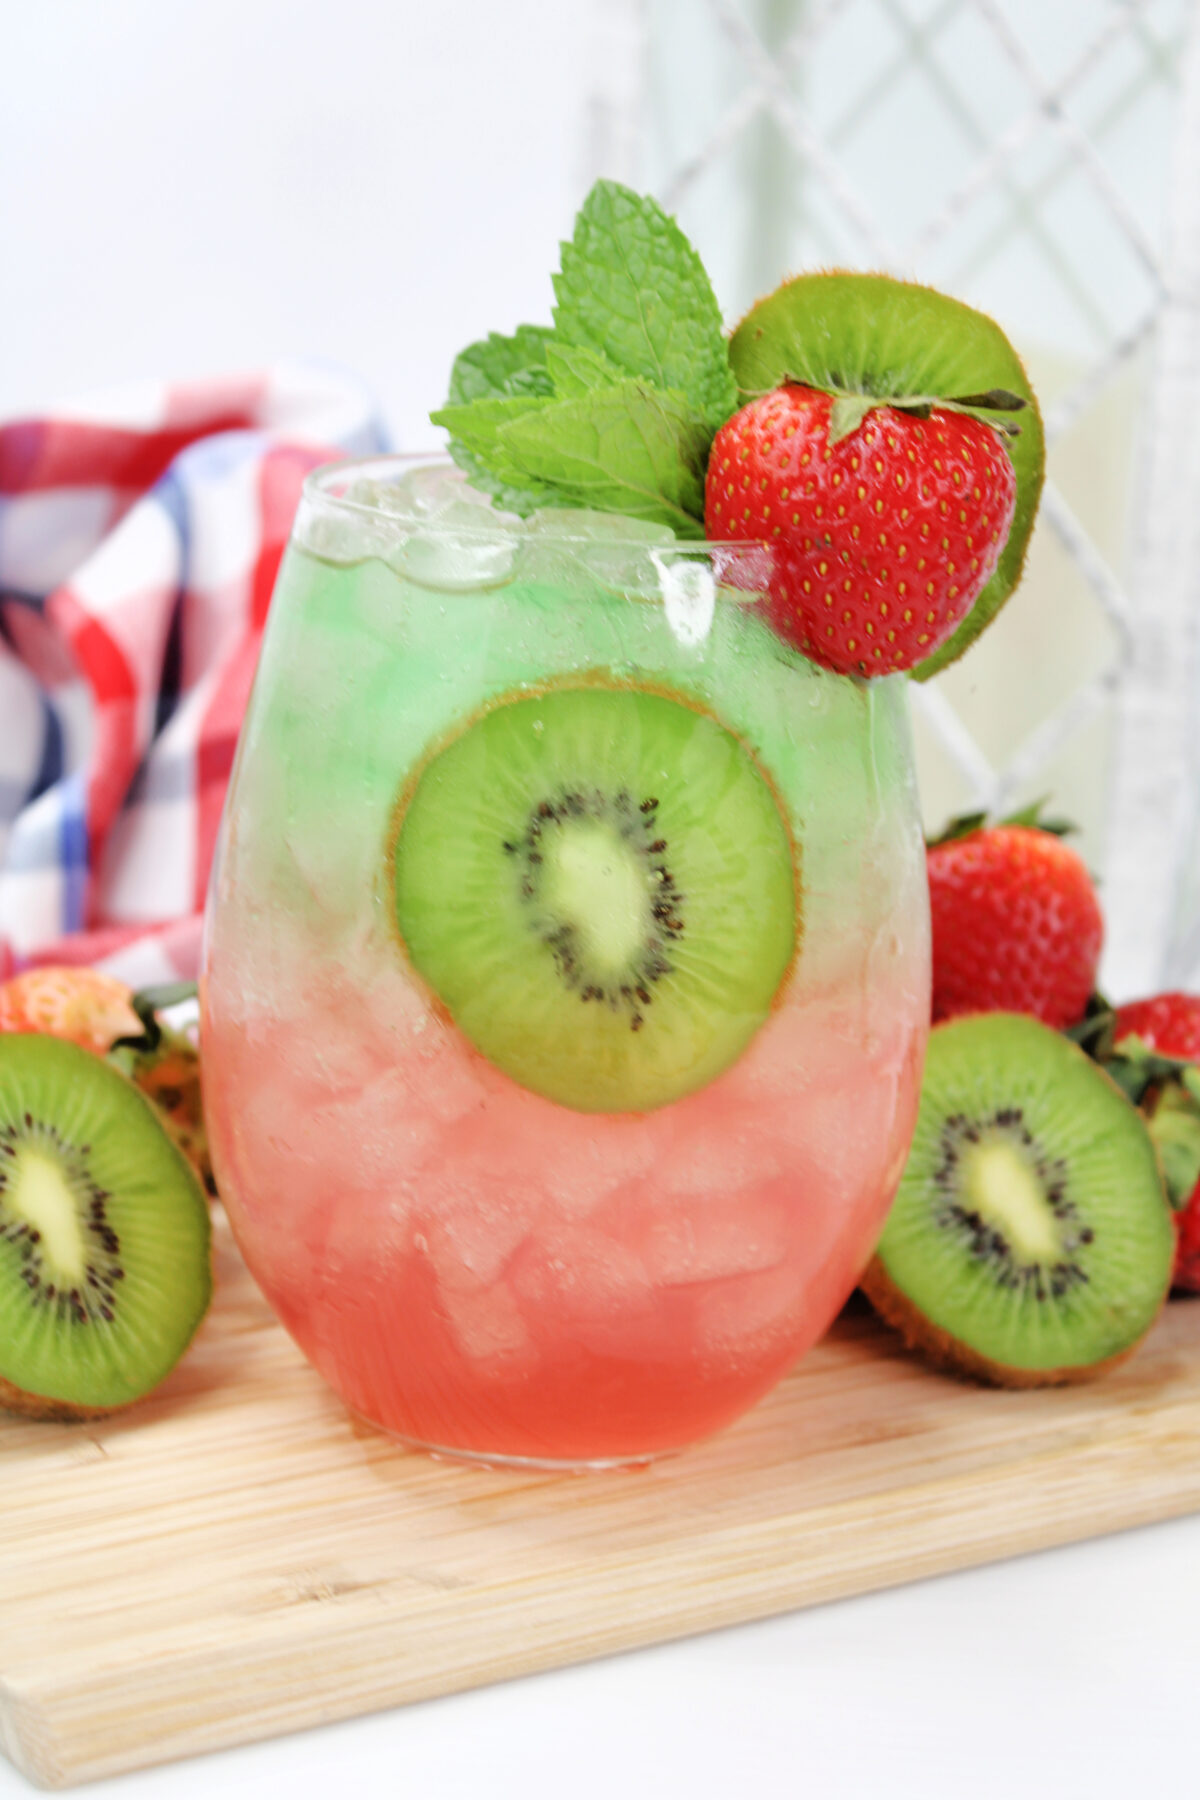 Looking for a refreshing drink to cool down with this summer? Check out this strawberry kiwi cocktail recipe, it's perfect for any occasion!